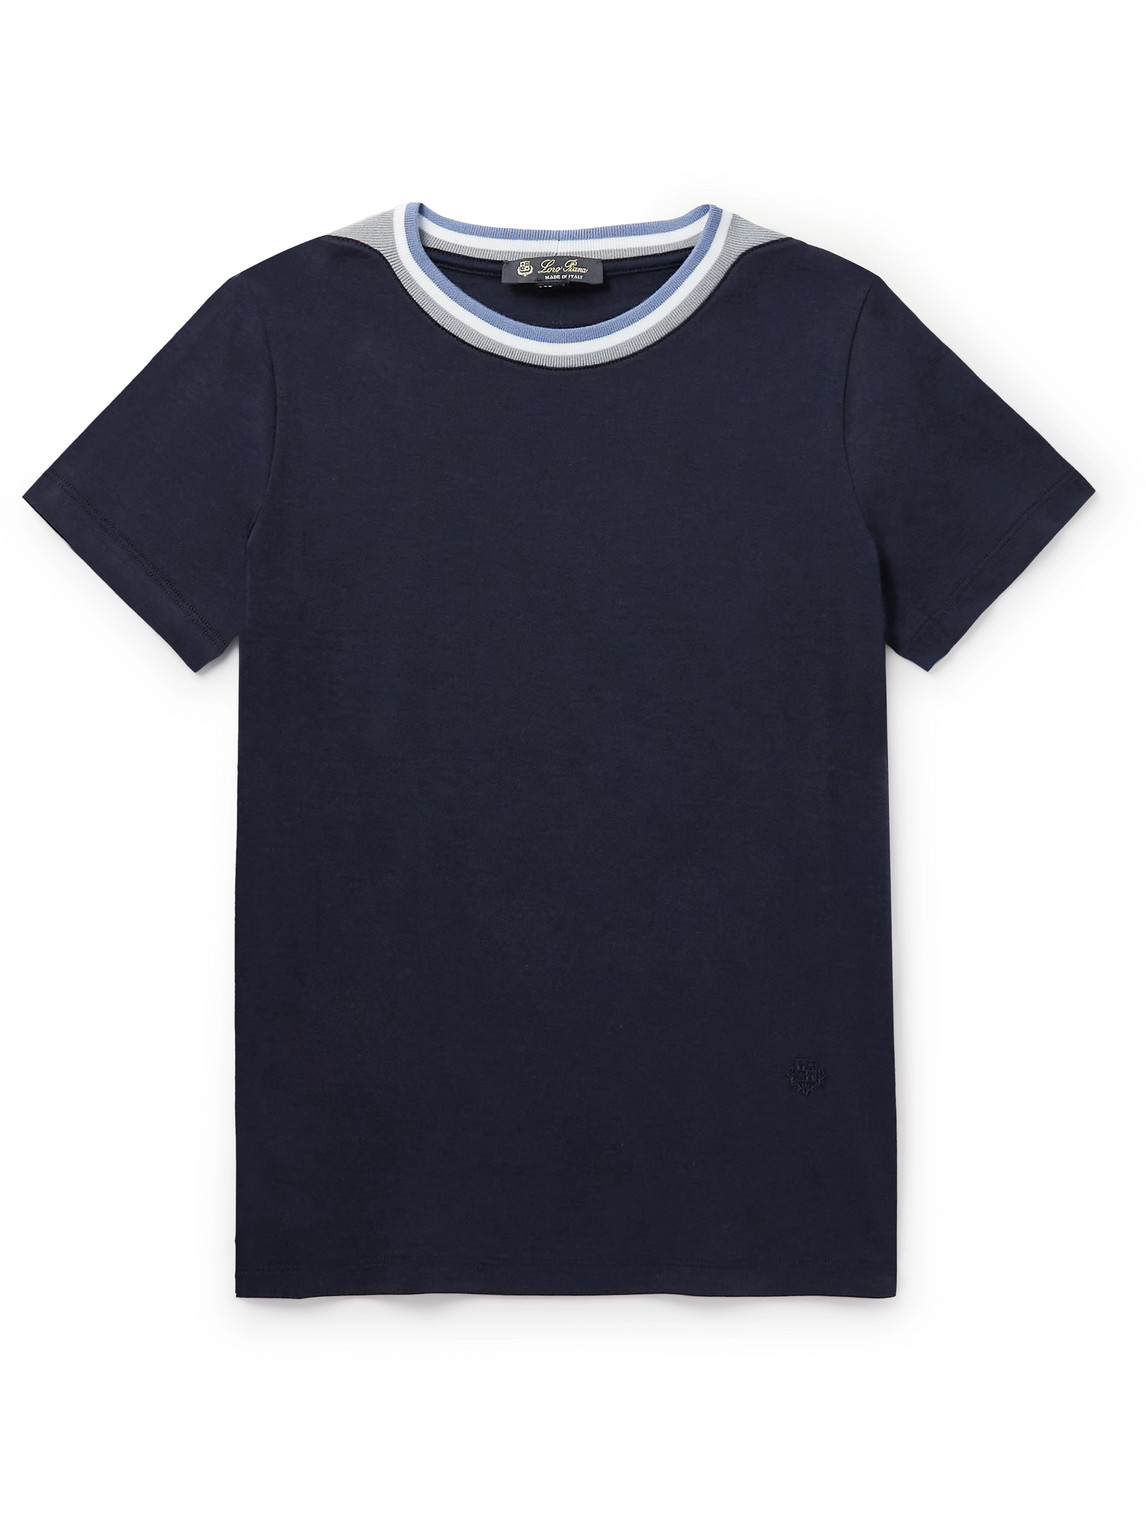 Contrast-Tipped Silk and Cotton-Blend T-Shirt